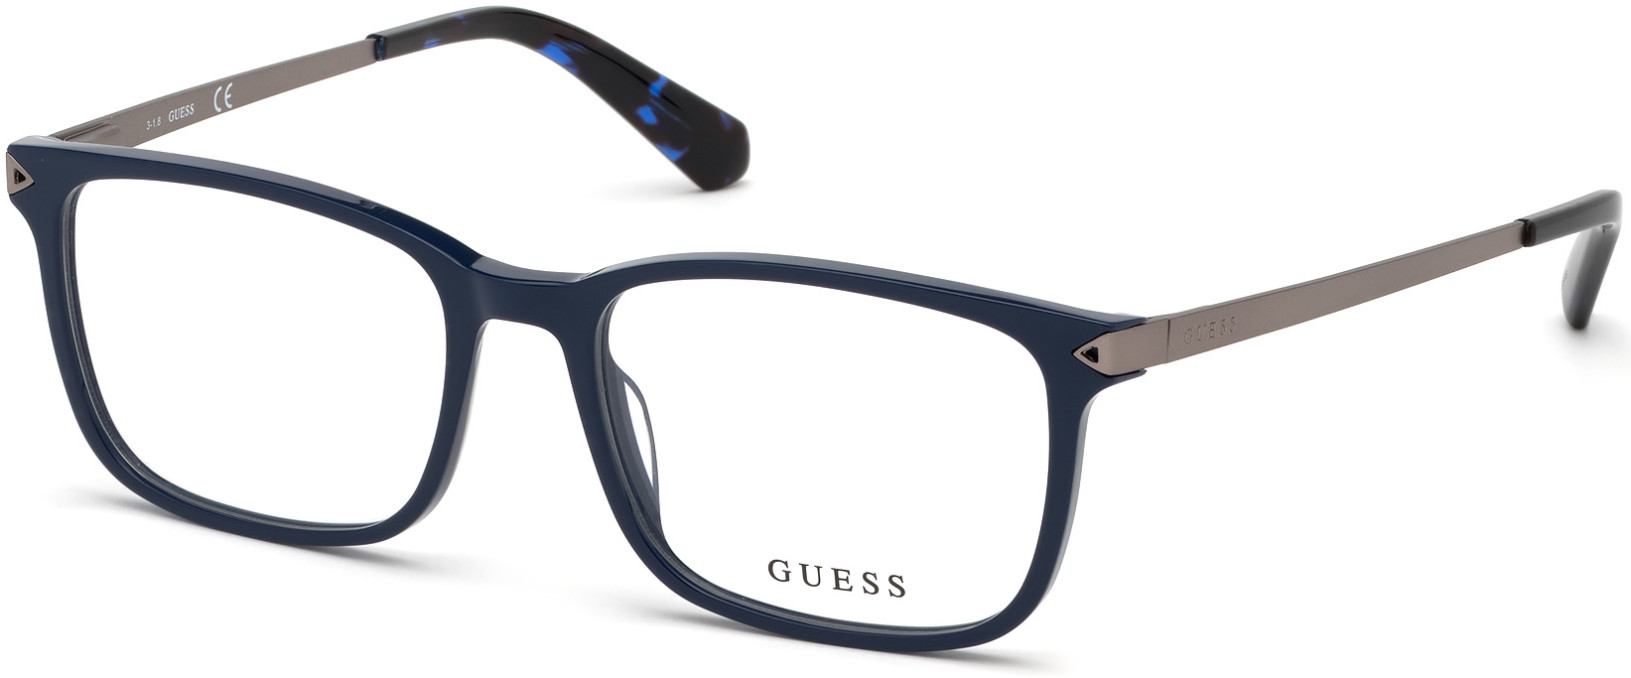 GUESS 1963 092